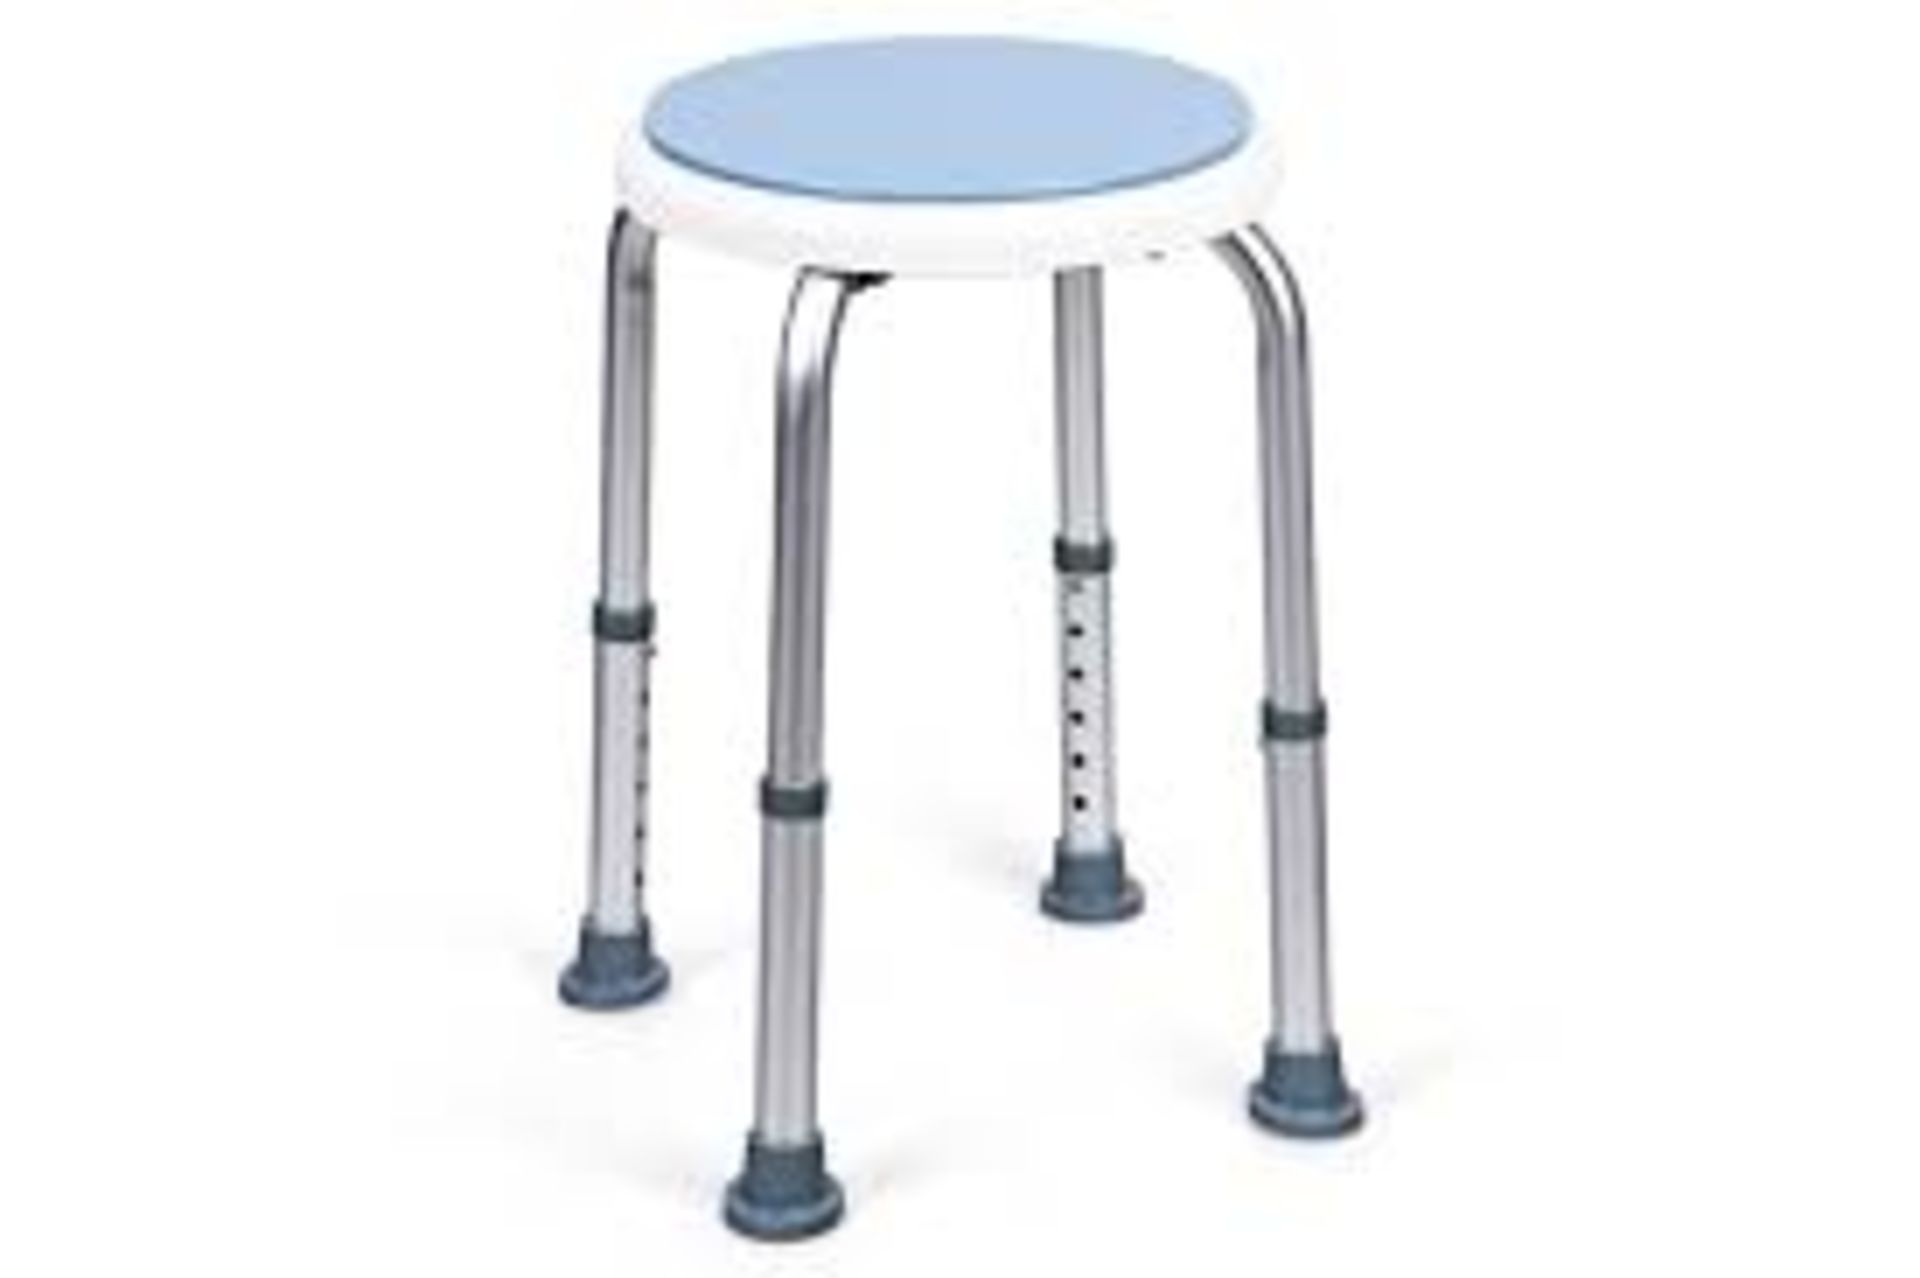 Costway 360° Rotating Shower Stool Height Adjustable Bath Chair. -R14.6.